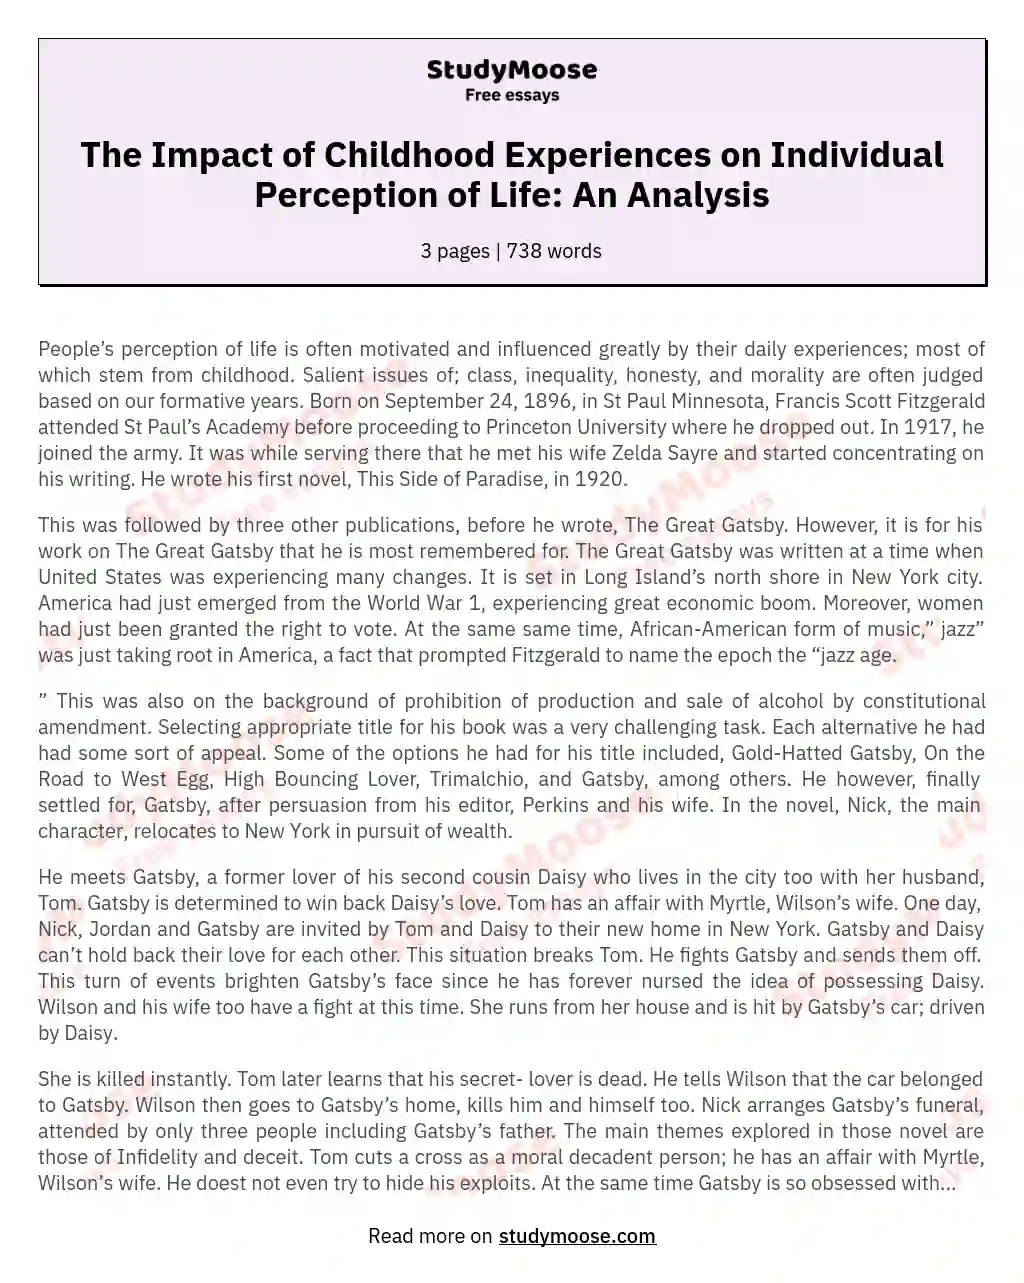 The Impact of Childhood Experiences on Individual Perception of Life: An Analysis essay